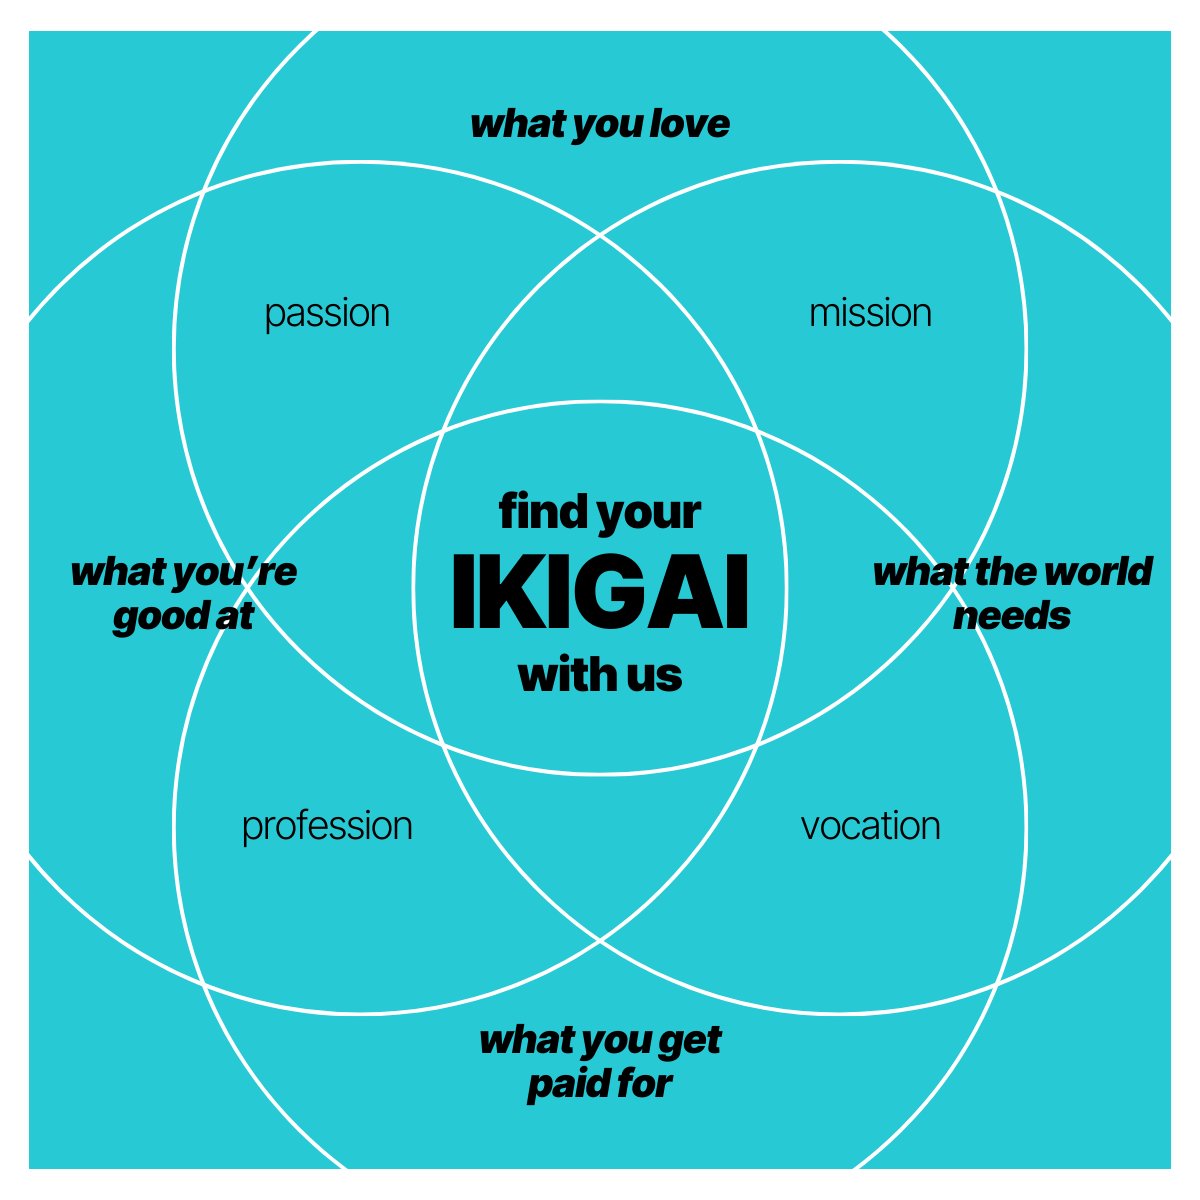 ✨  Ikigai - the secret sauce to a fulfilling life, blending what you love, what you're skilled at, what the world needs, and what can sustain you.

Let's find and live our Ikigai, together.

#StarSevenSix #Ikigai #FindYourPassion #MakeADifference #WeAreStarSevenSix